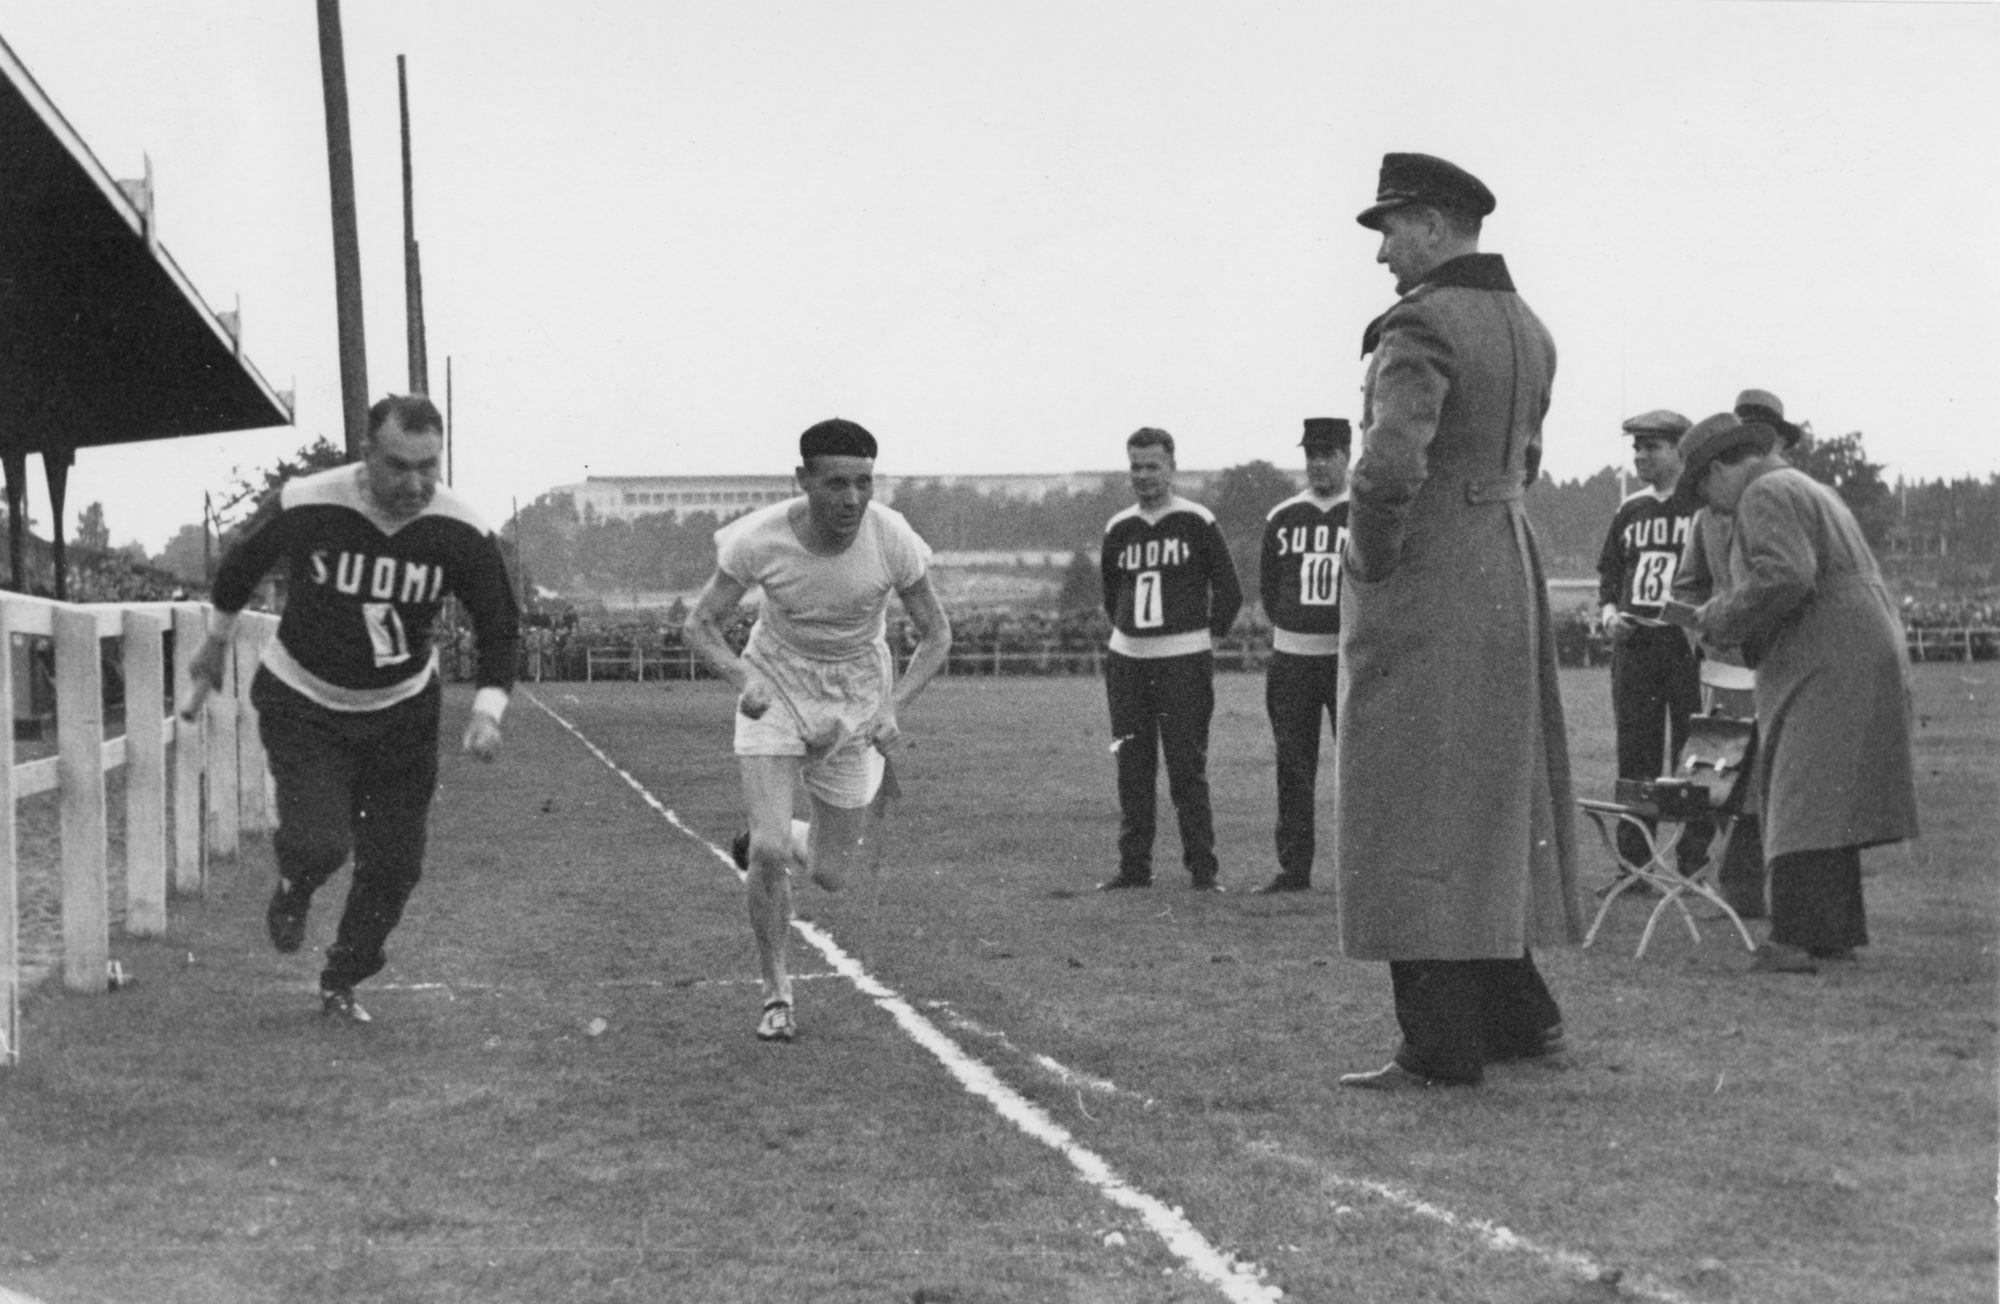 A friendly race with Paavo Nurmi in the early 1930’s. © Urheilumuseo